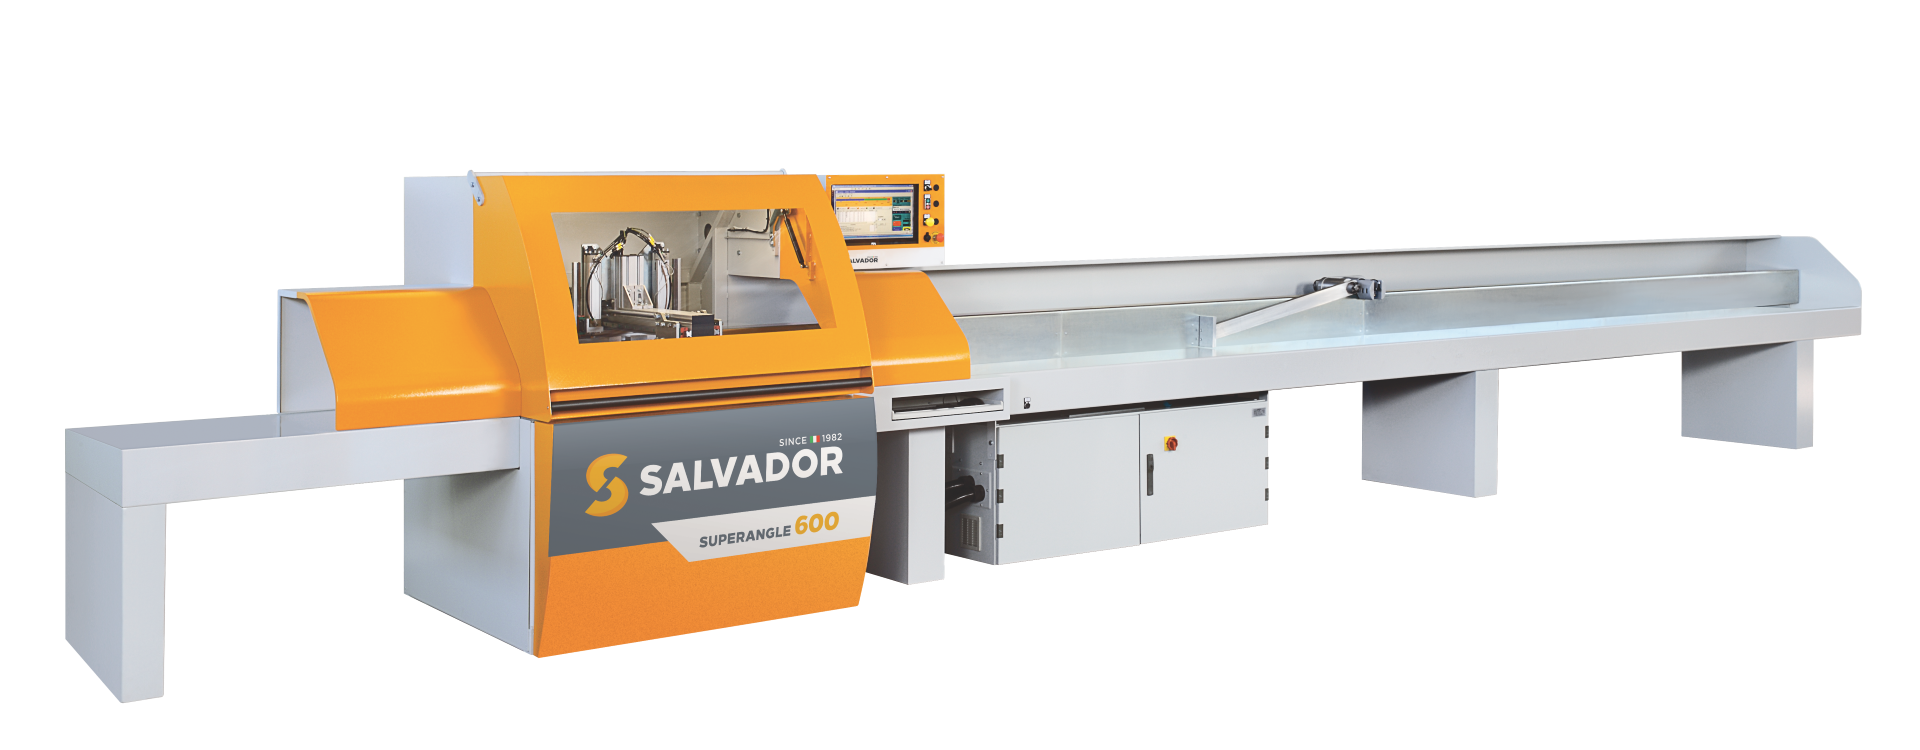 Automatic cross saw with the pusher - SALVADOR SuperAngle 600